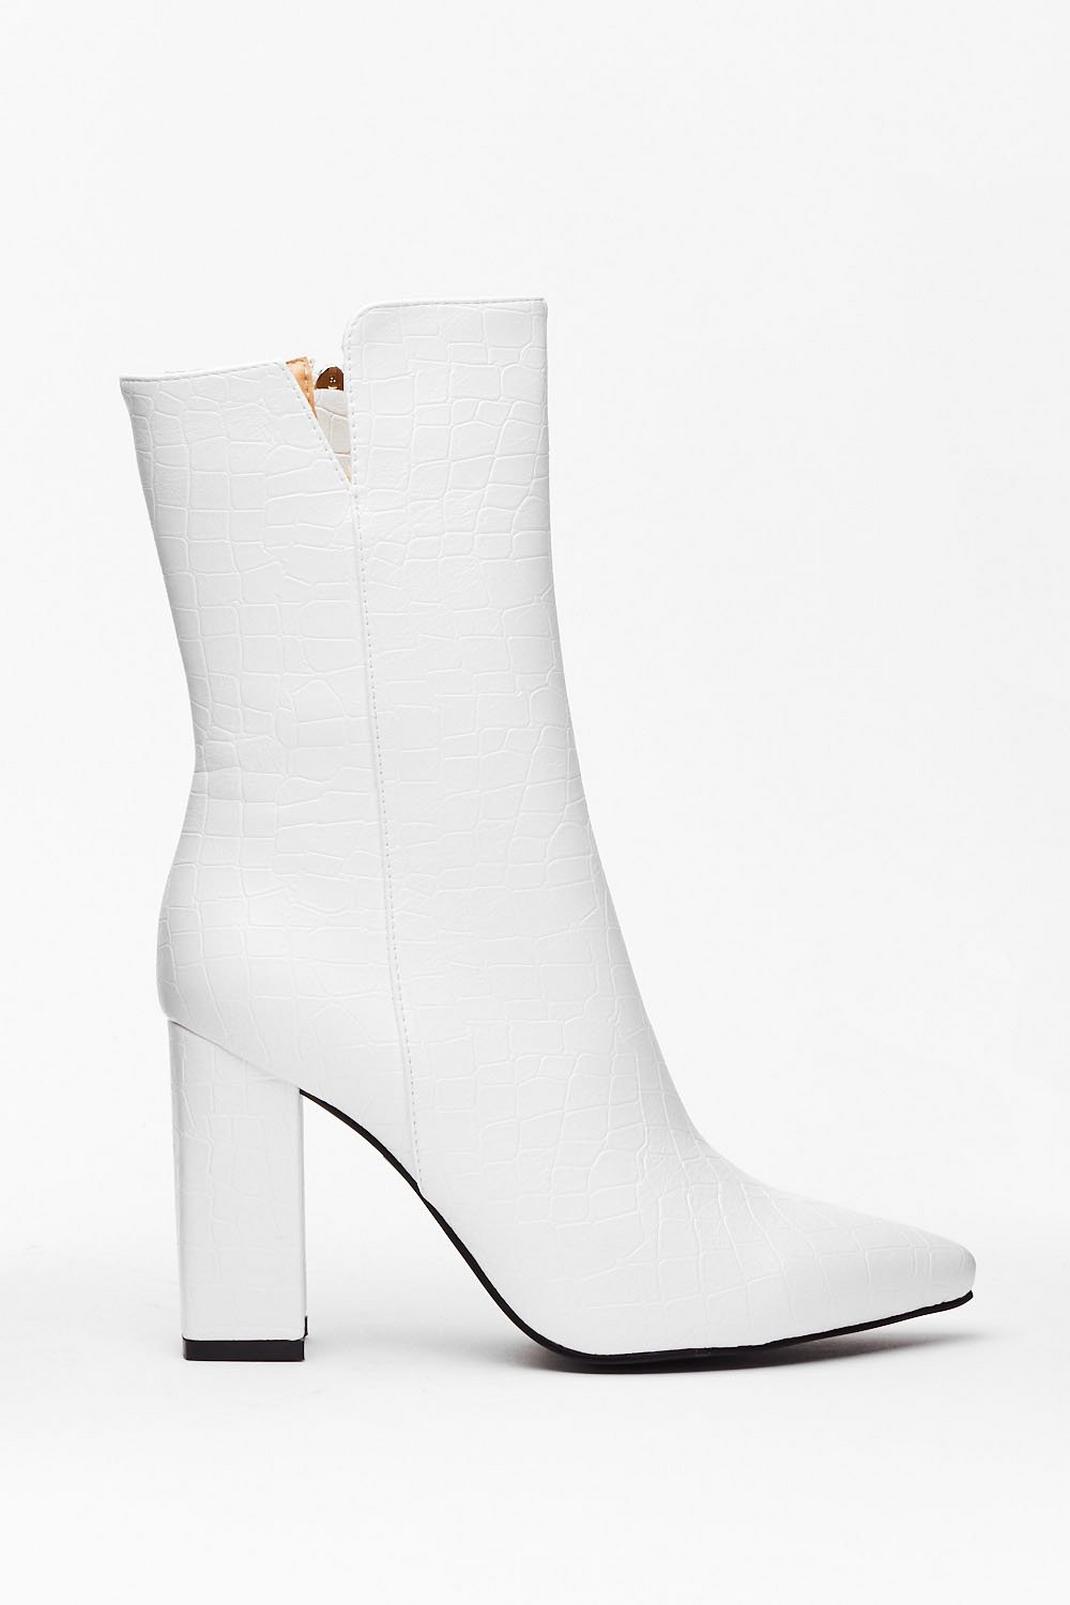 White Faux Leather High Ankle Boots with Croc Embossed Design image number 1